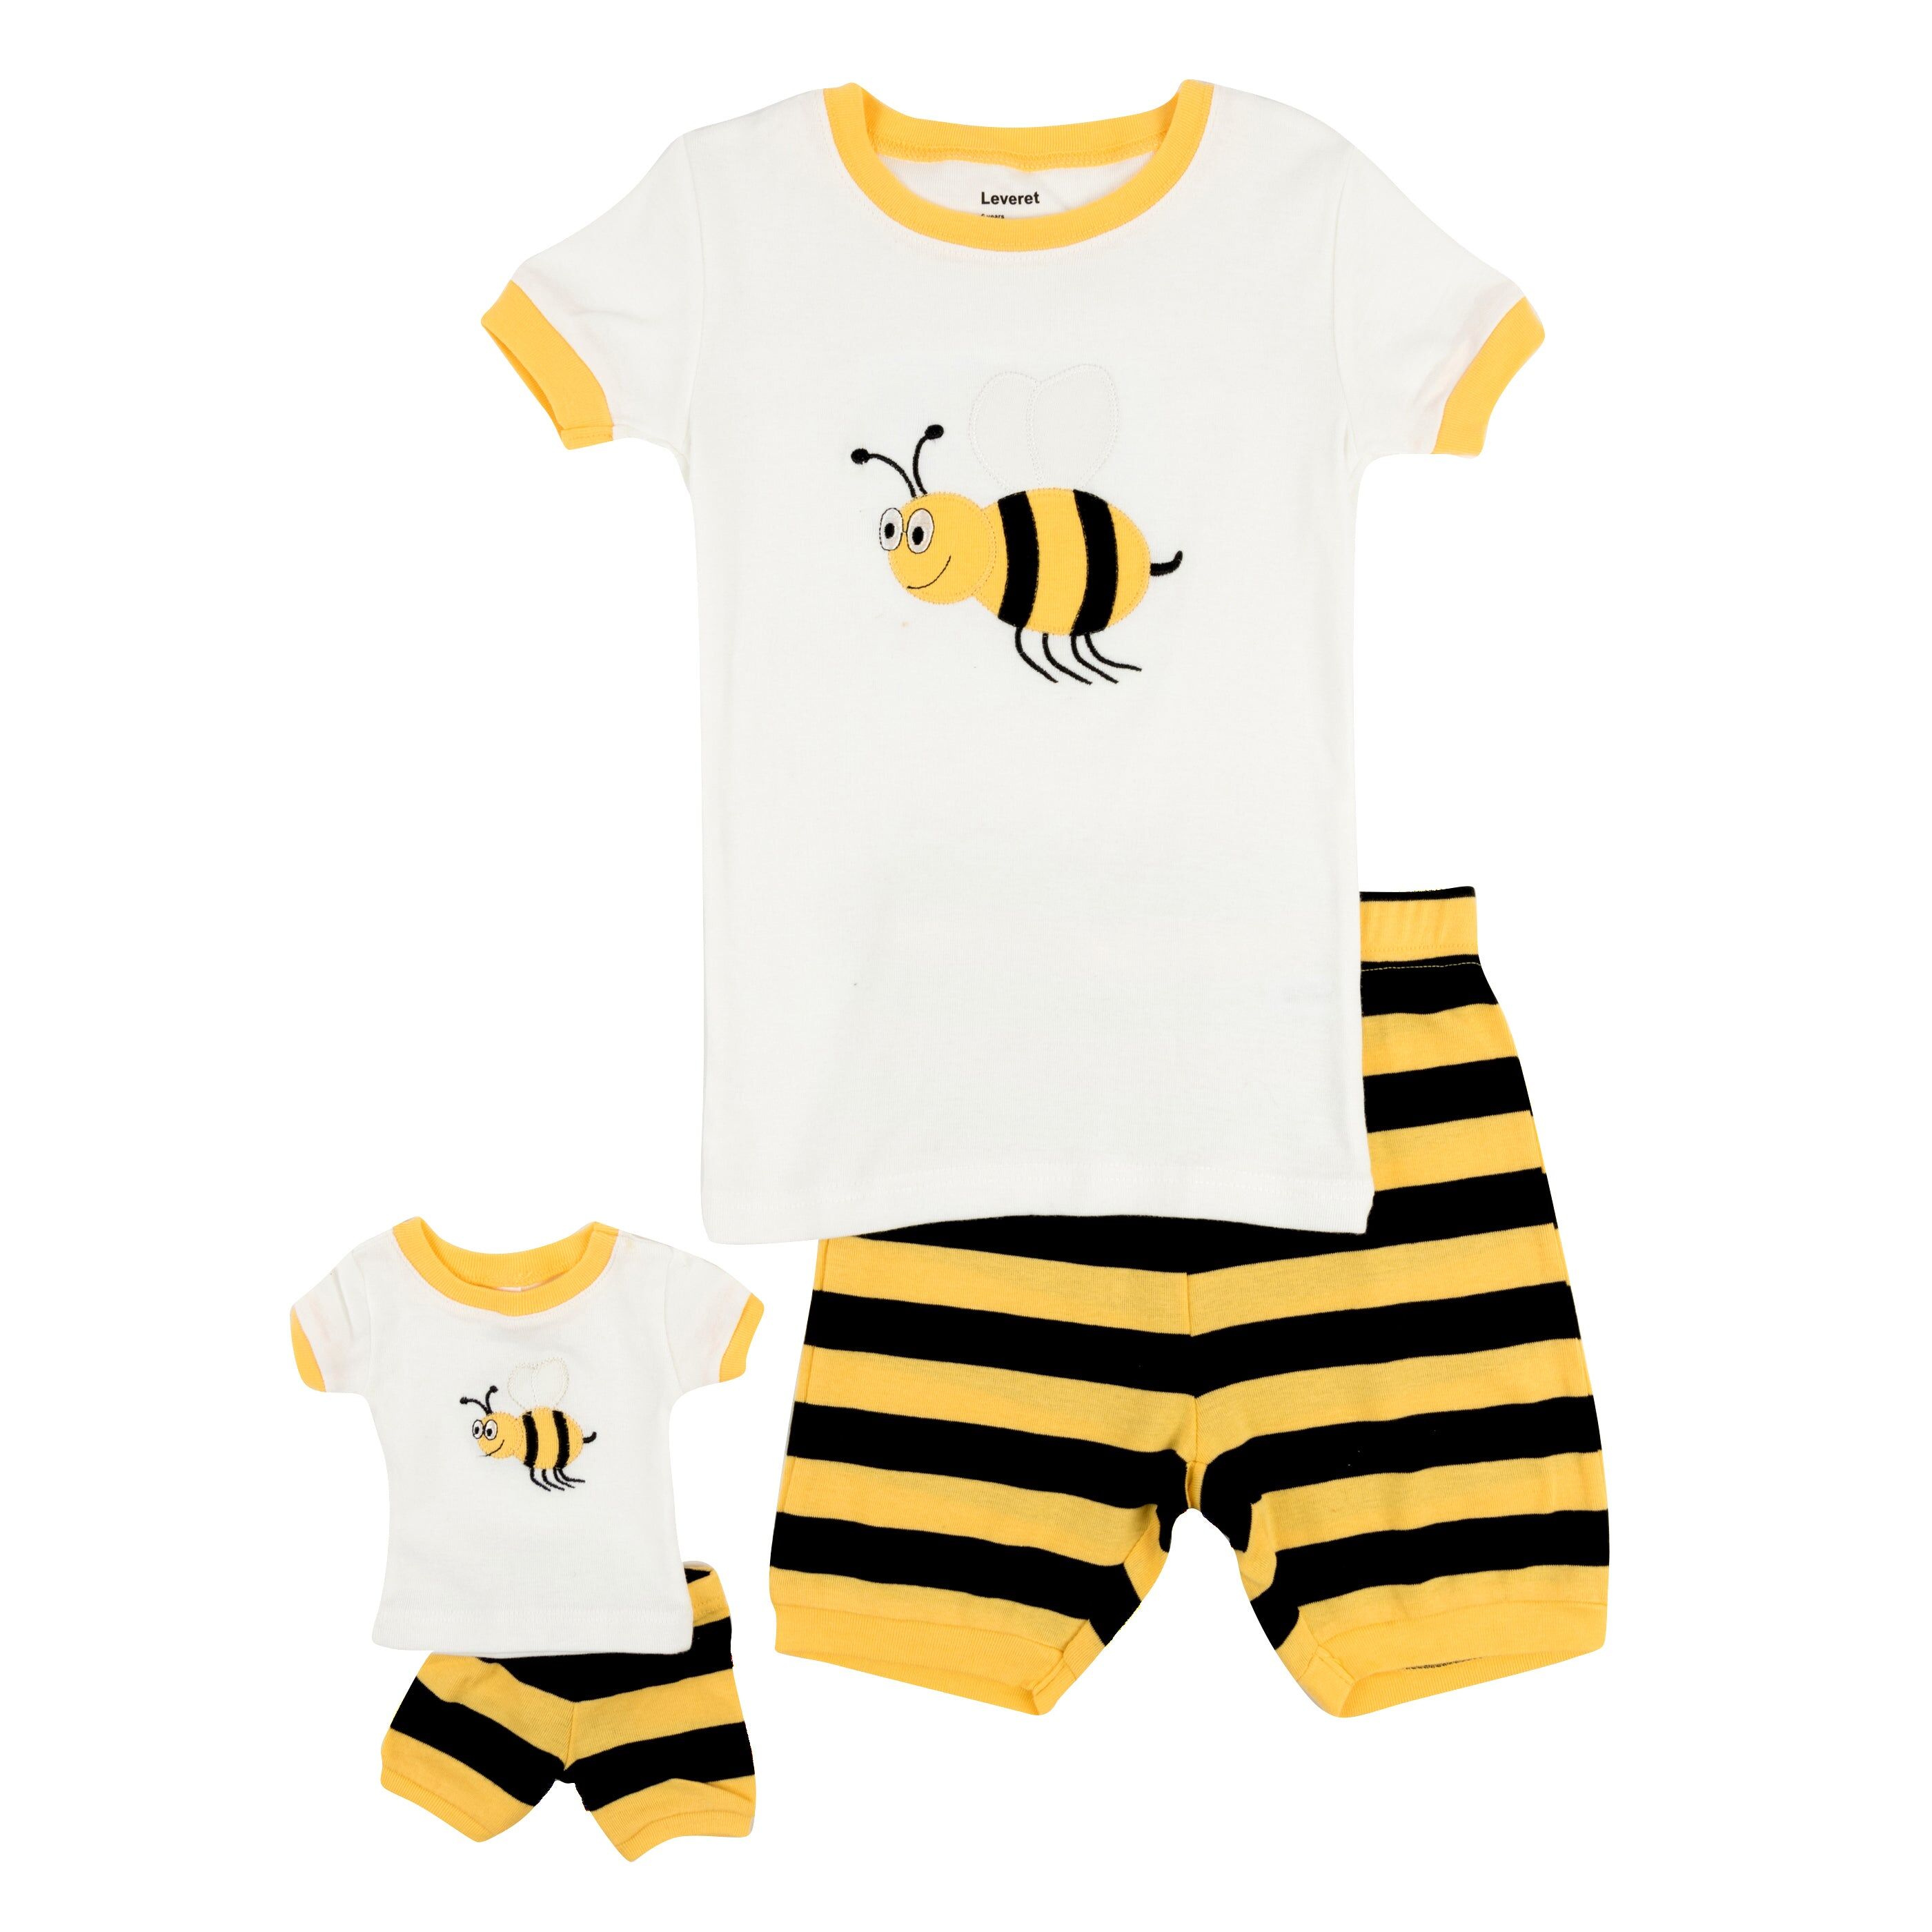 Leveret Girls and Matching Doll Short Pajamas Bumble Bee US 3T female